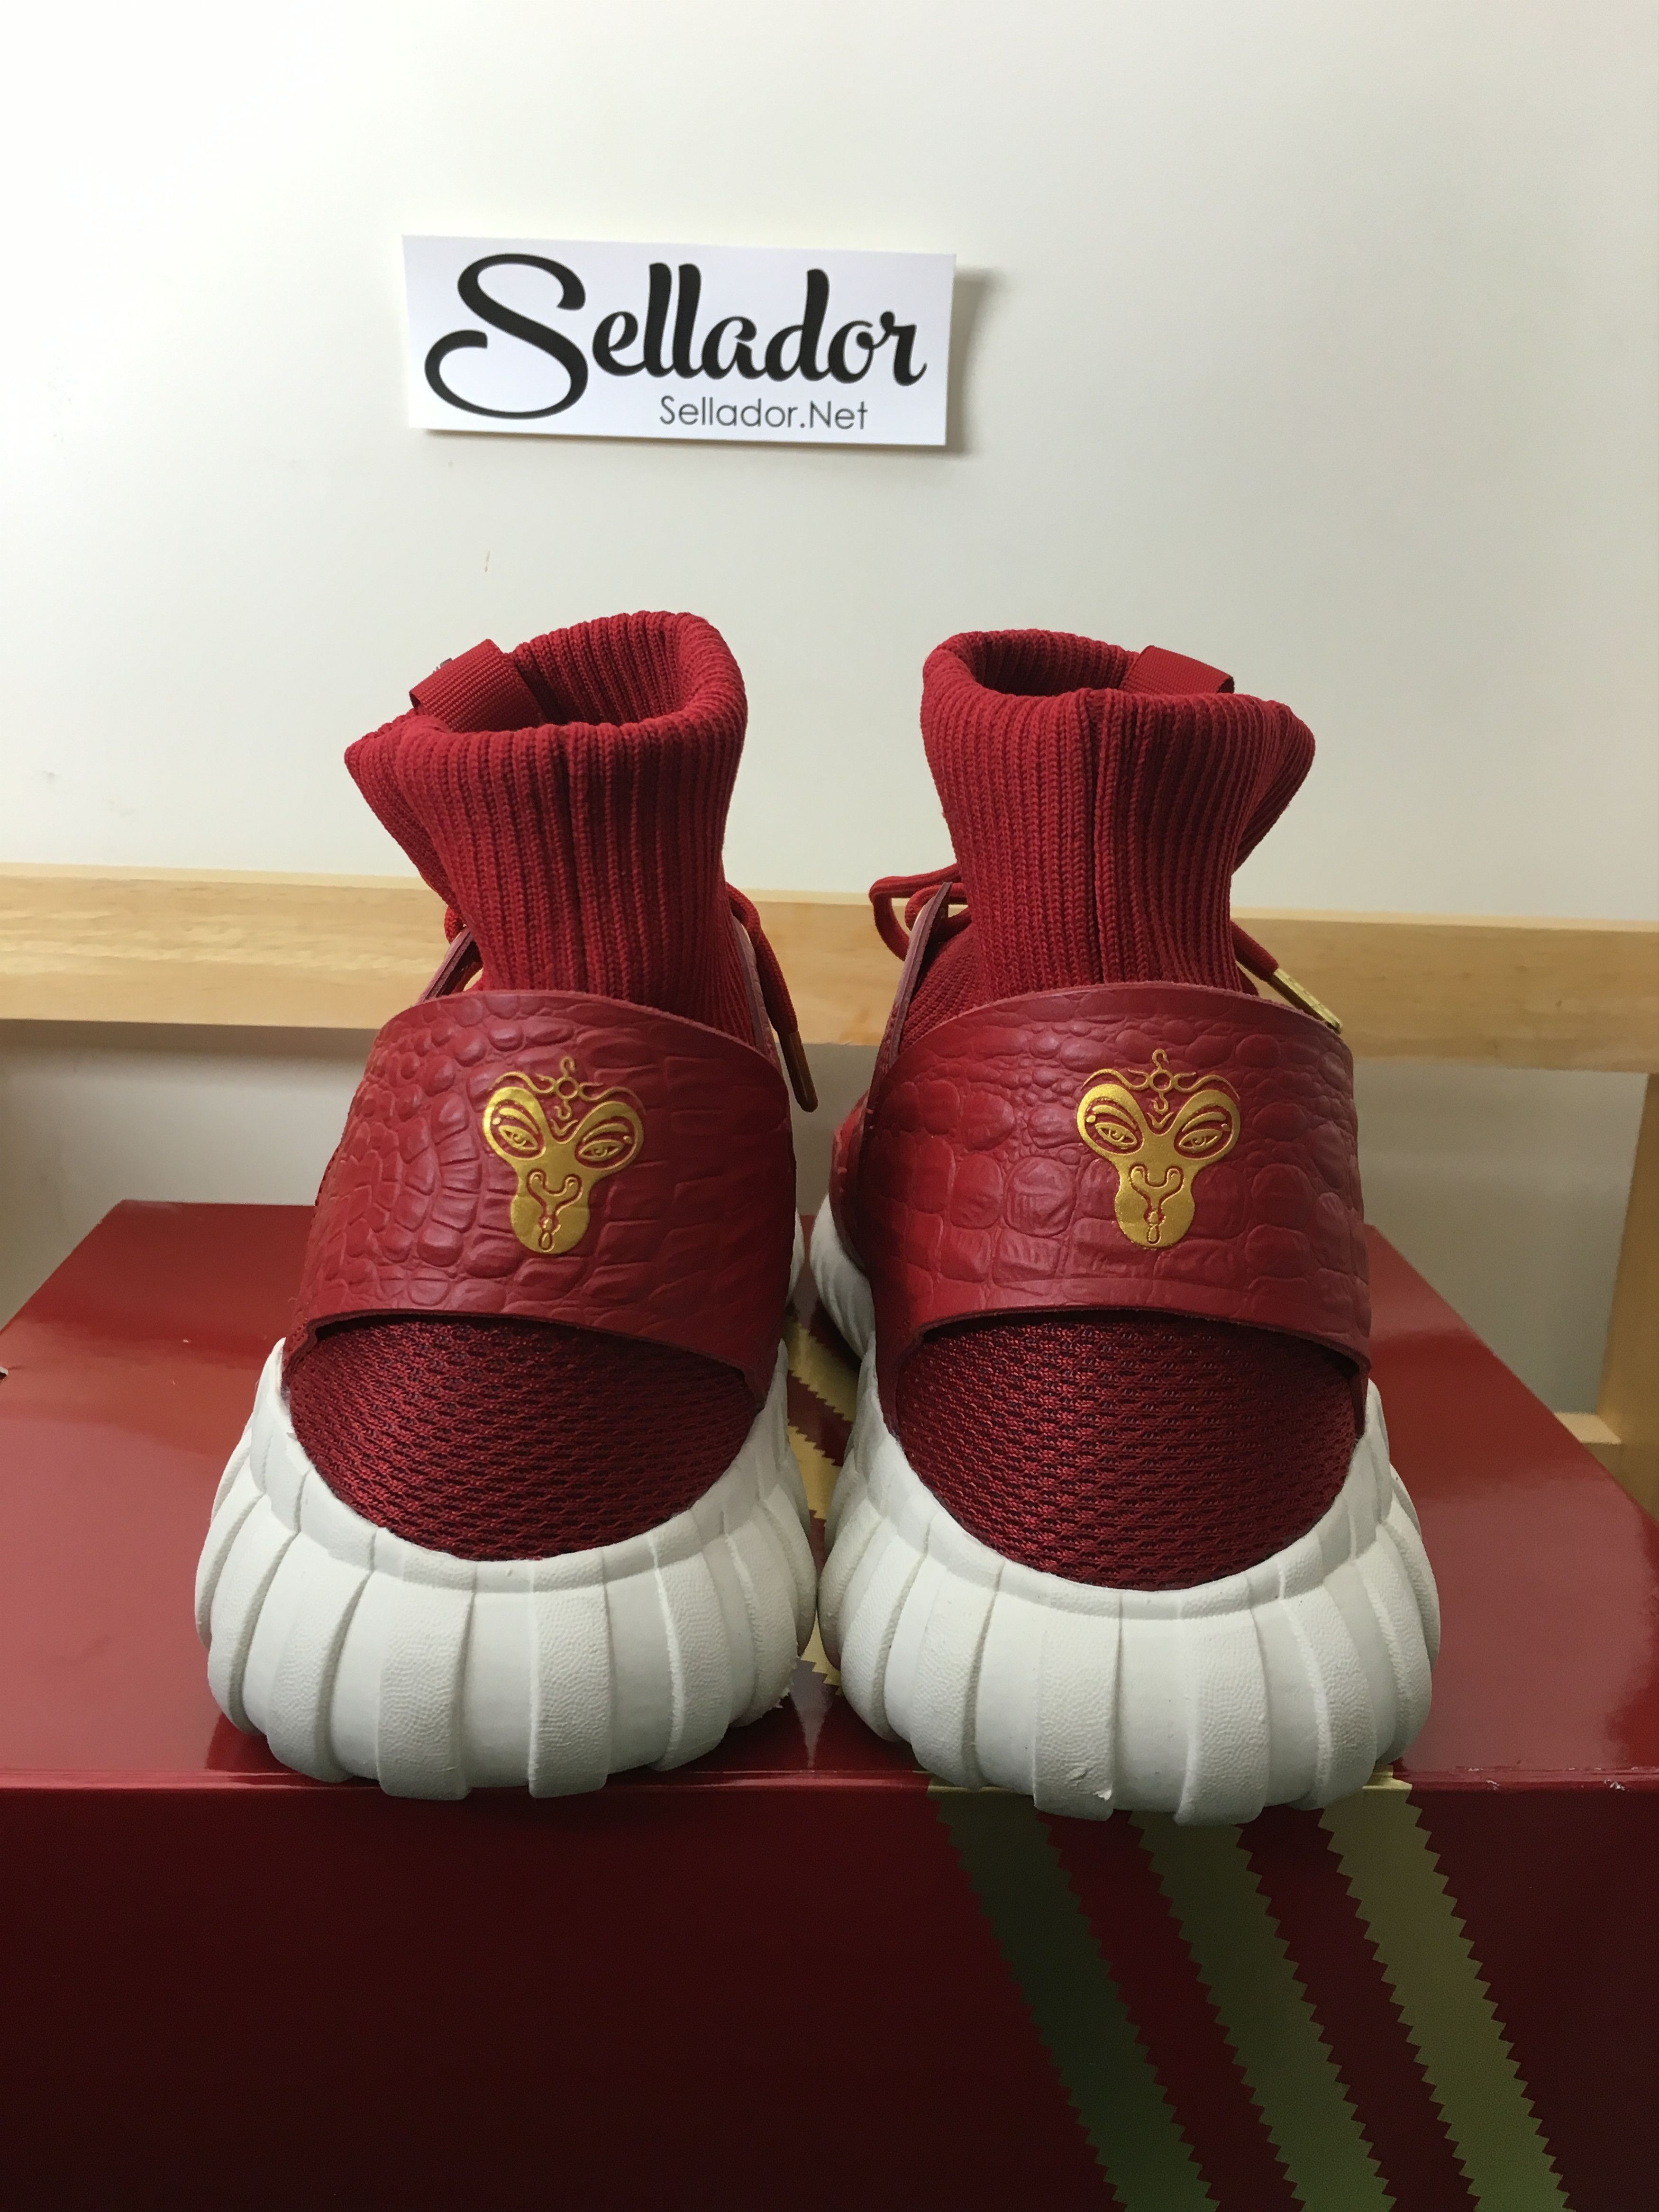 Adidas Chinese New Year Tubular Doom Size US 10.5 / EU 43-44 - 2 Preview